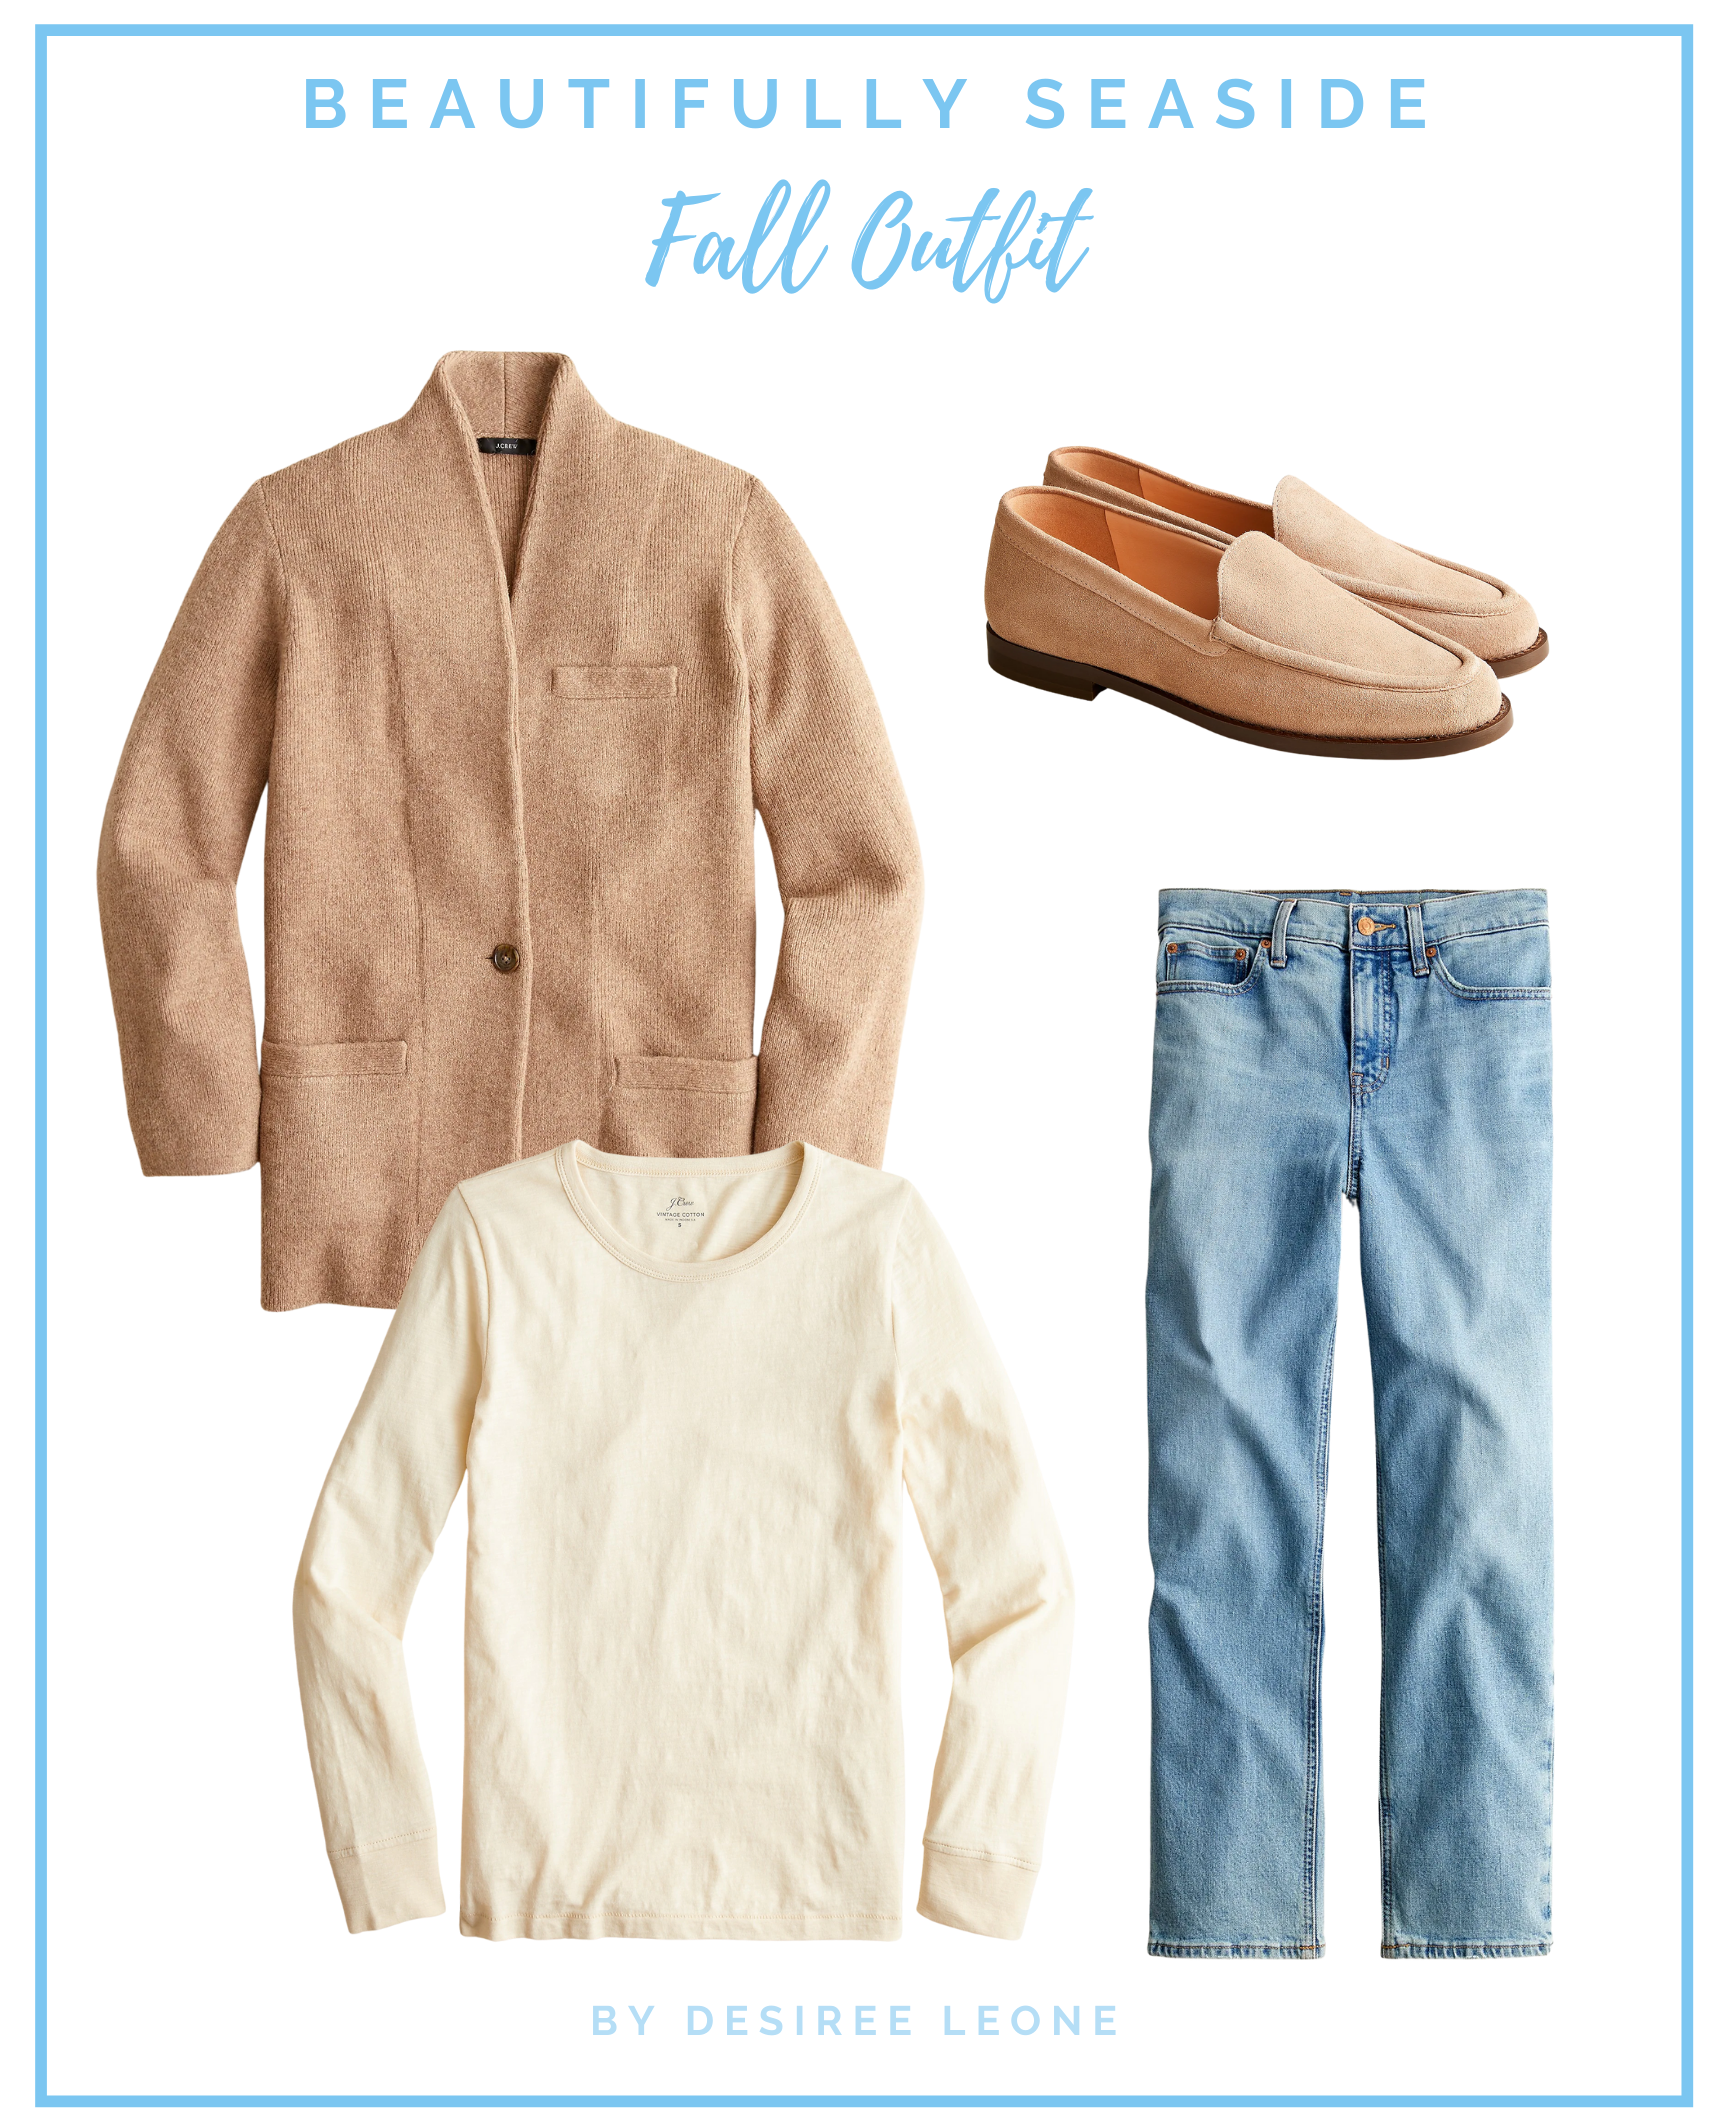 21 Relaxing Fall Outfits Ideas You Must Try Now. We share gorgeous